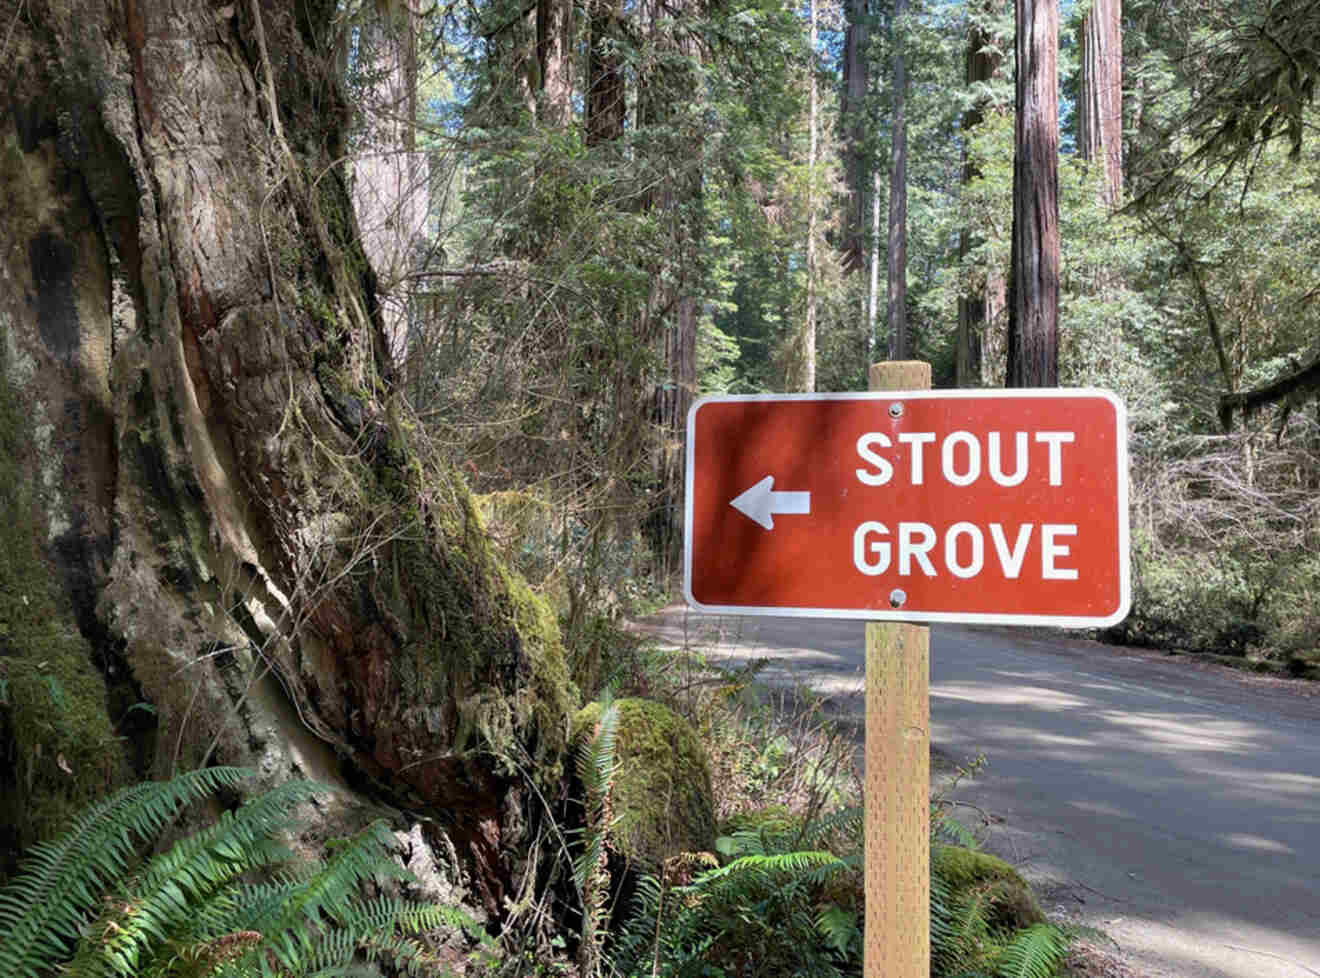 a sign pointing to the left to stout grove